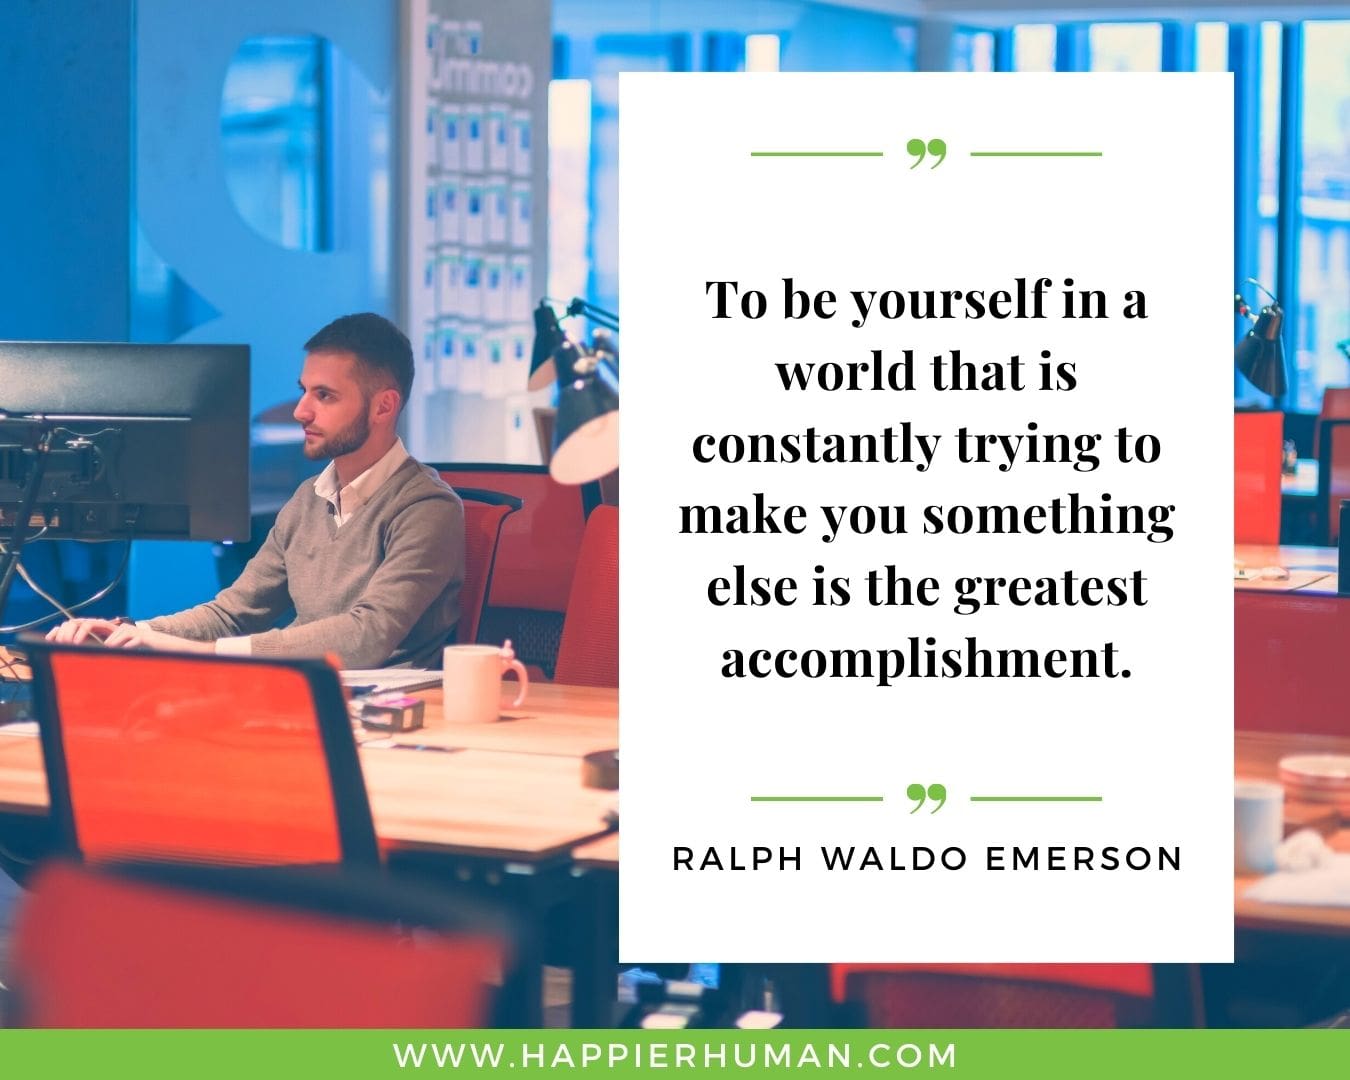 Introvert Quotes - “To be yourself in a world that is constantly trying to make you something else is the greatest accomplishment.” – Ralph Waldo Emerson